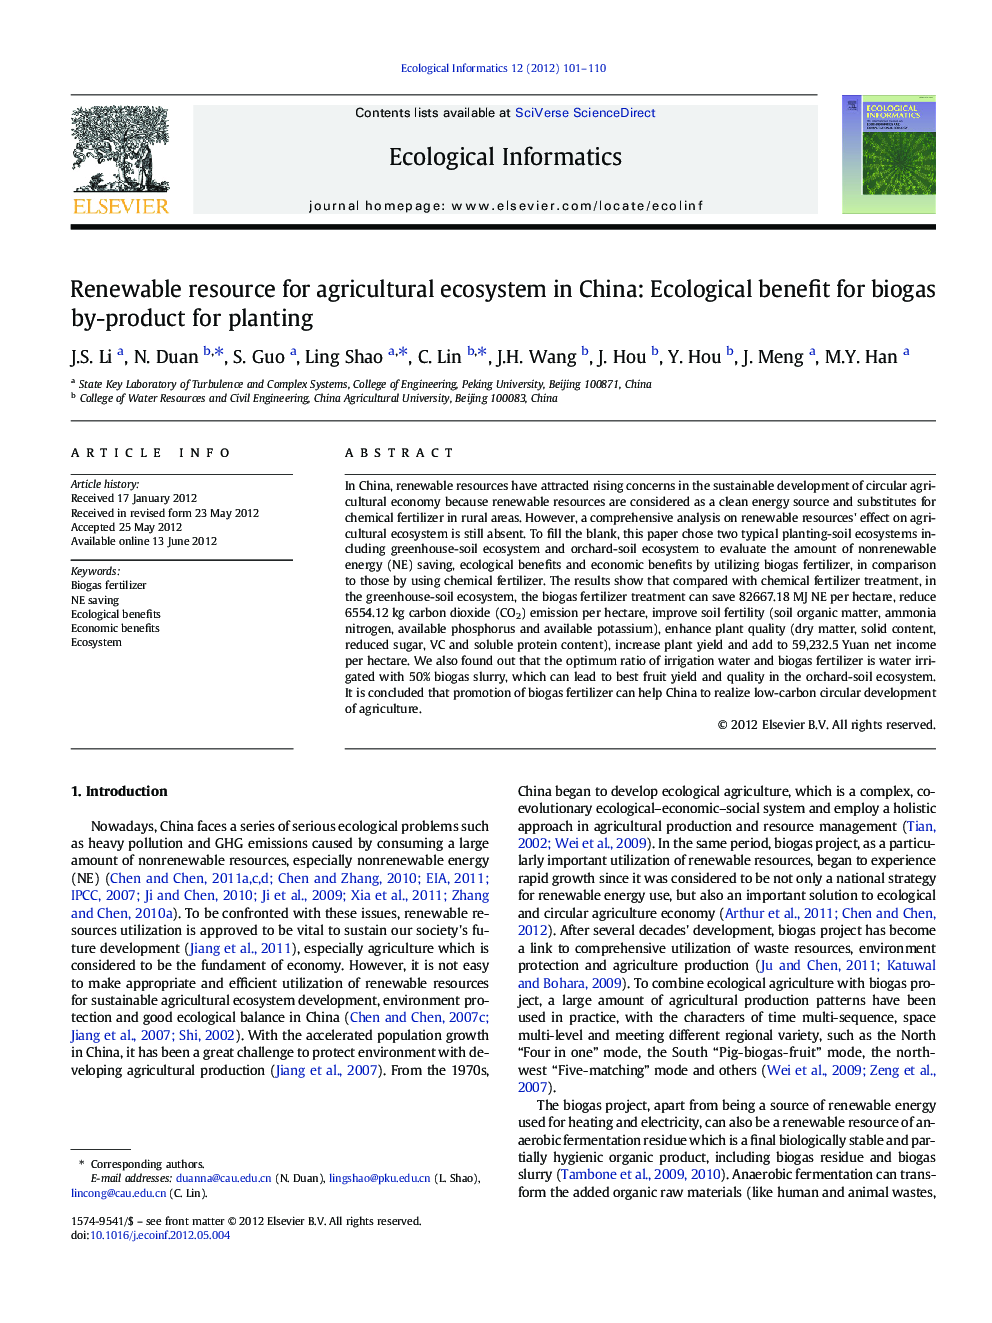 Renewable resource for agricultural ecosystem in China: Ecological benefit for biogas by-product for planting